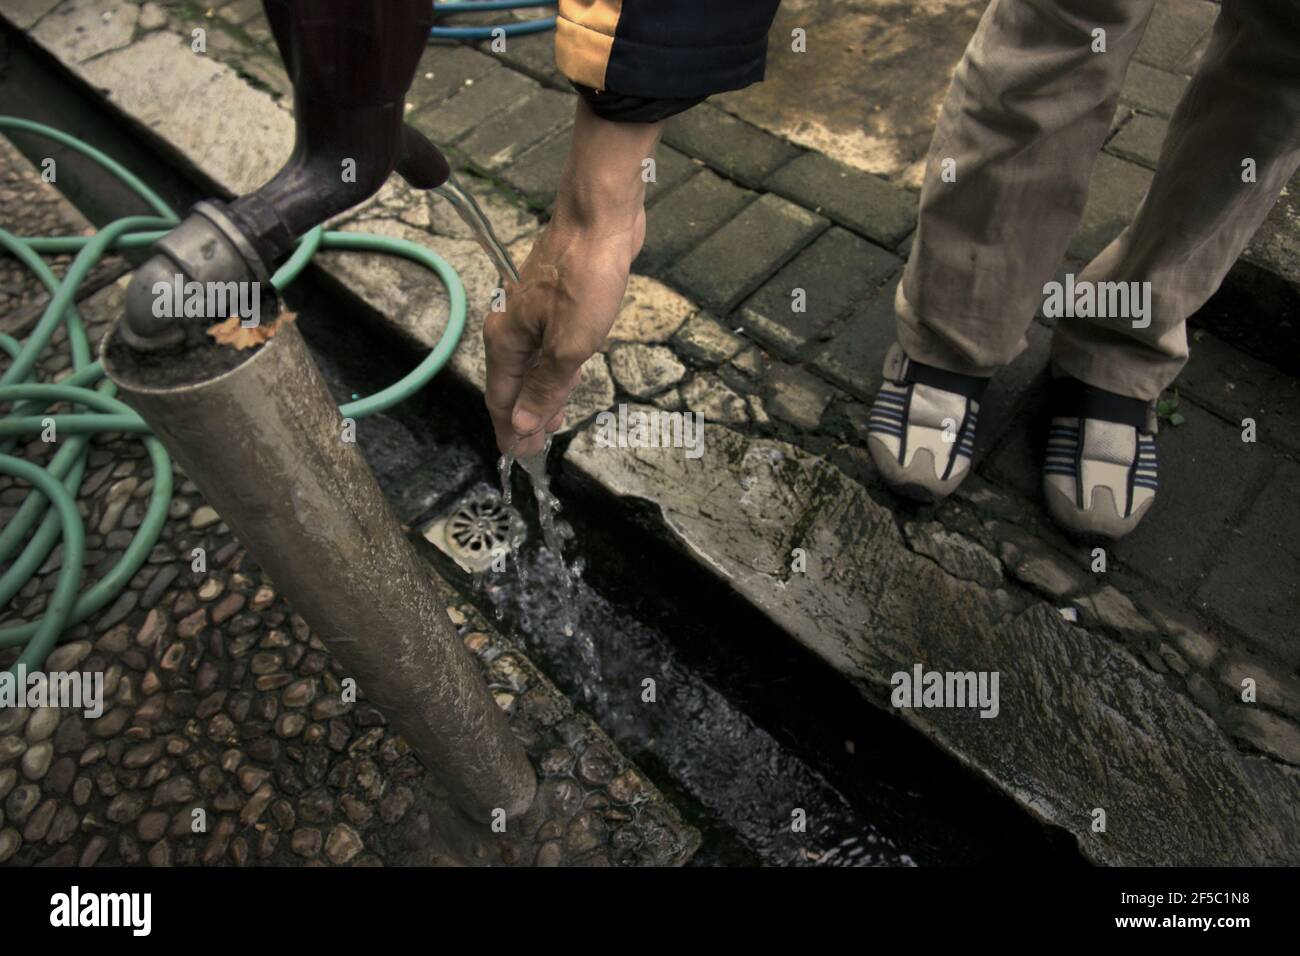 A water tap above a drainage equipped with plugholes to make sure the waste water will be absorbed by the ground, at the yard of a school in Jakarta, Indonesia. According to UN Water in their Summary Progress Update 2021 published on March 1, 2021 in Geneva, since 2015, water-use efficiency has increased by 4% globally. 'With 17 percent of available water resources being withdrawn, the world as a whole is not considered water-stressed. However, this number hides stark regional differences: in some regions the level of water stress has increased by 35 percent during the last two decades.' Stock Photo